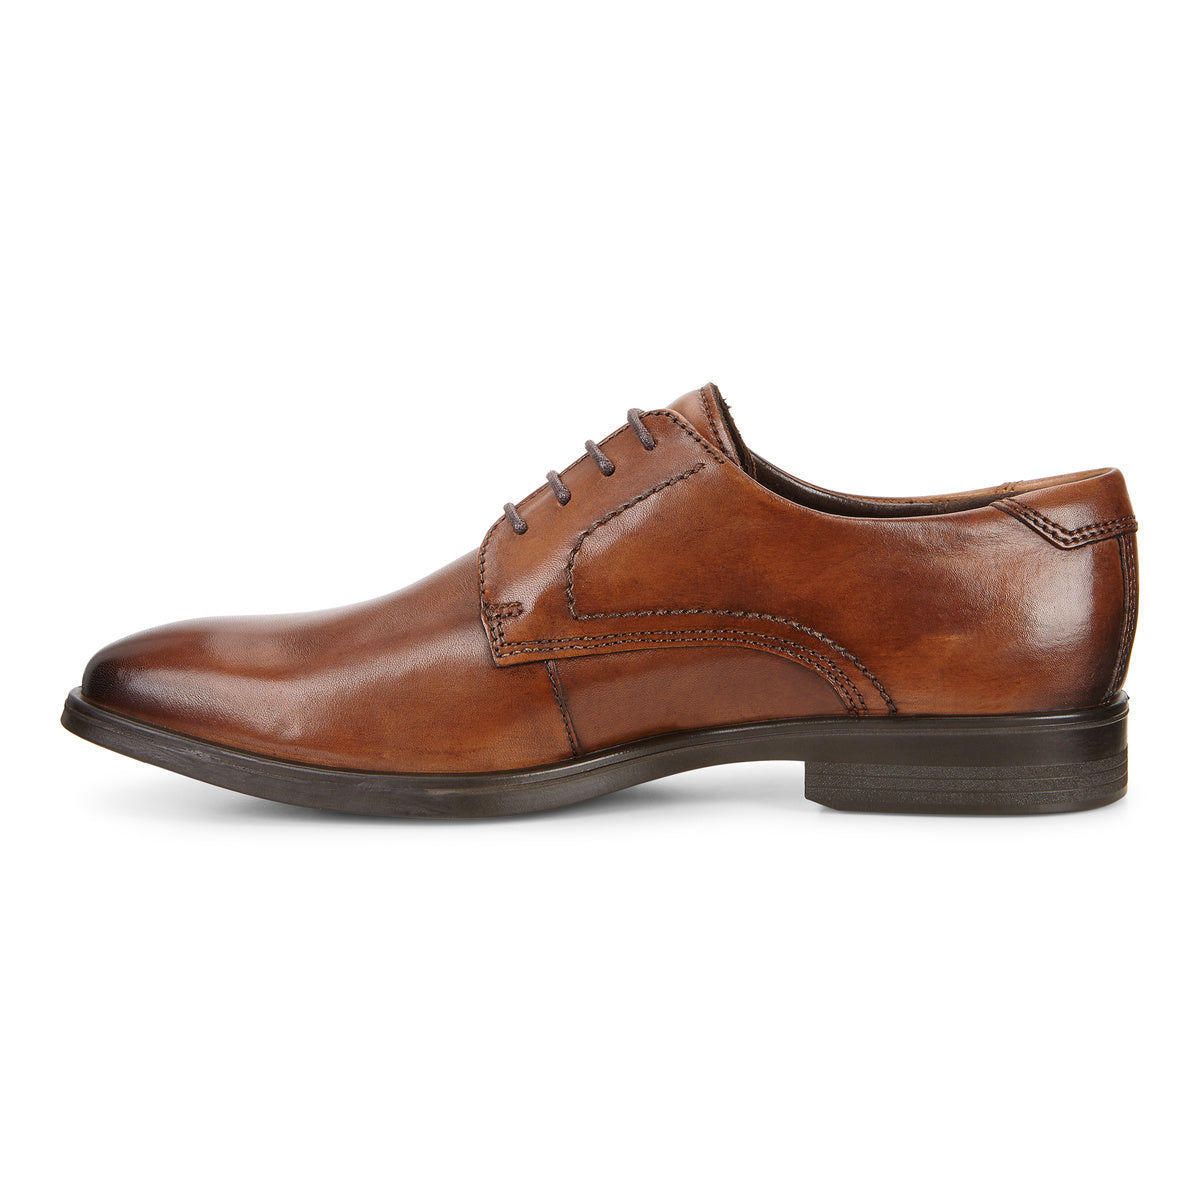 ECCO Melbourne Leather Lace Up Dress Shoe - Black or Amber